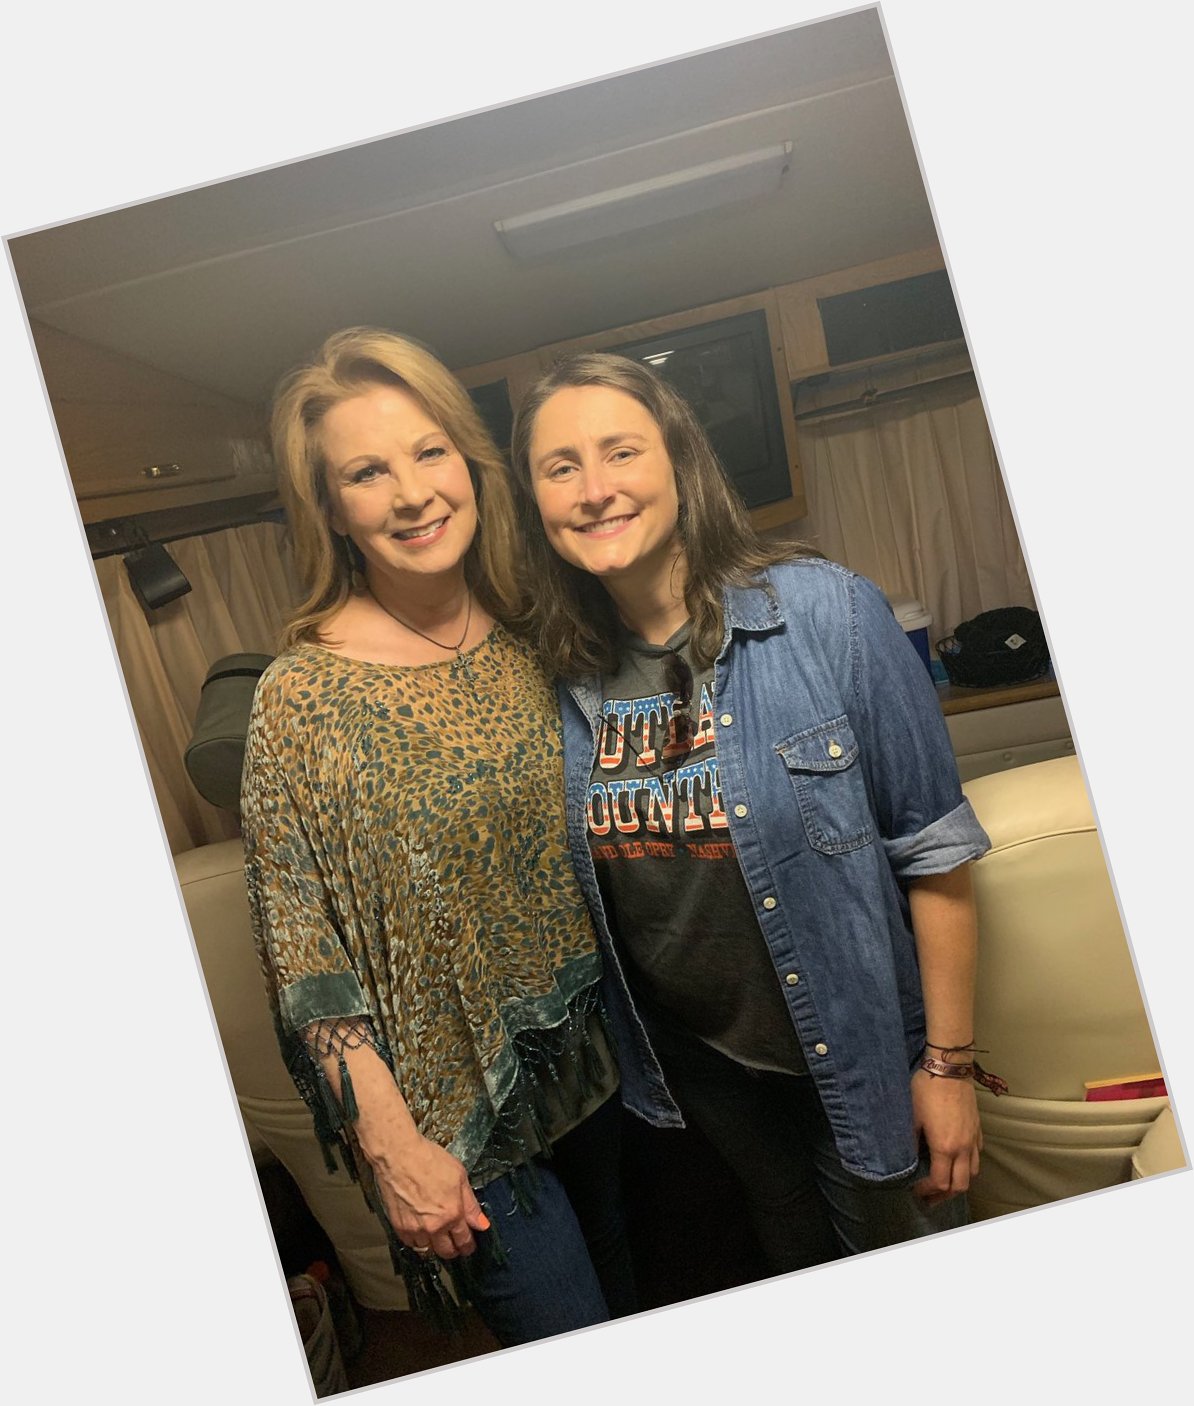 Happy birthday to this queen - the one and only Patty Loveless 